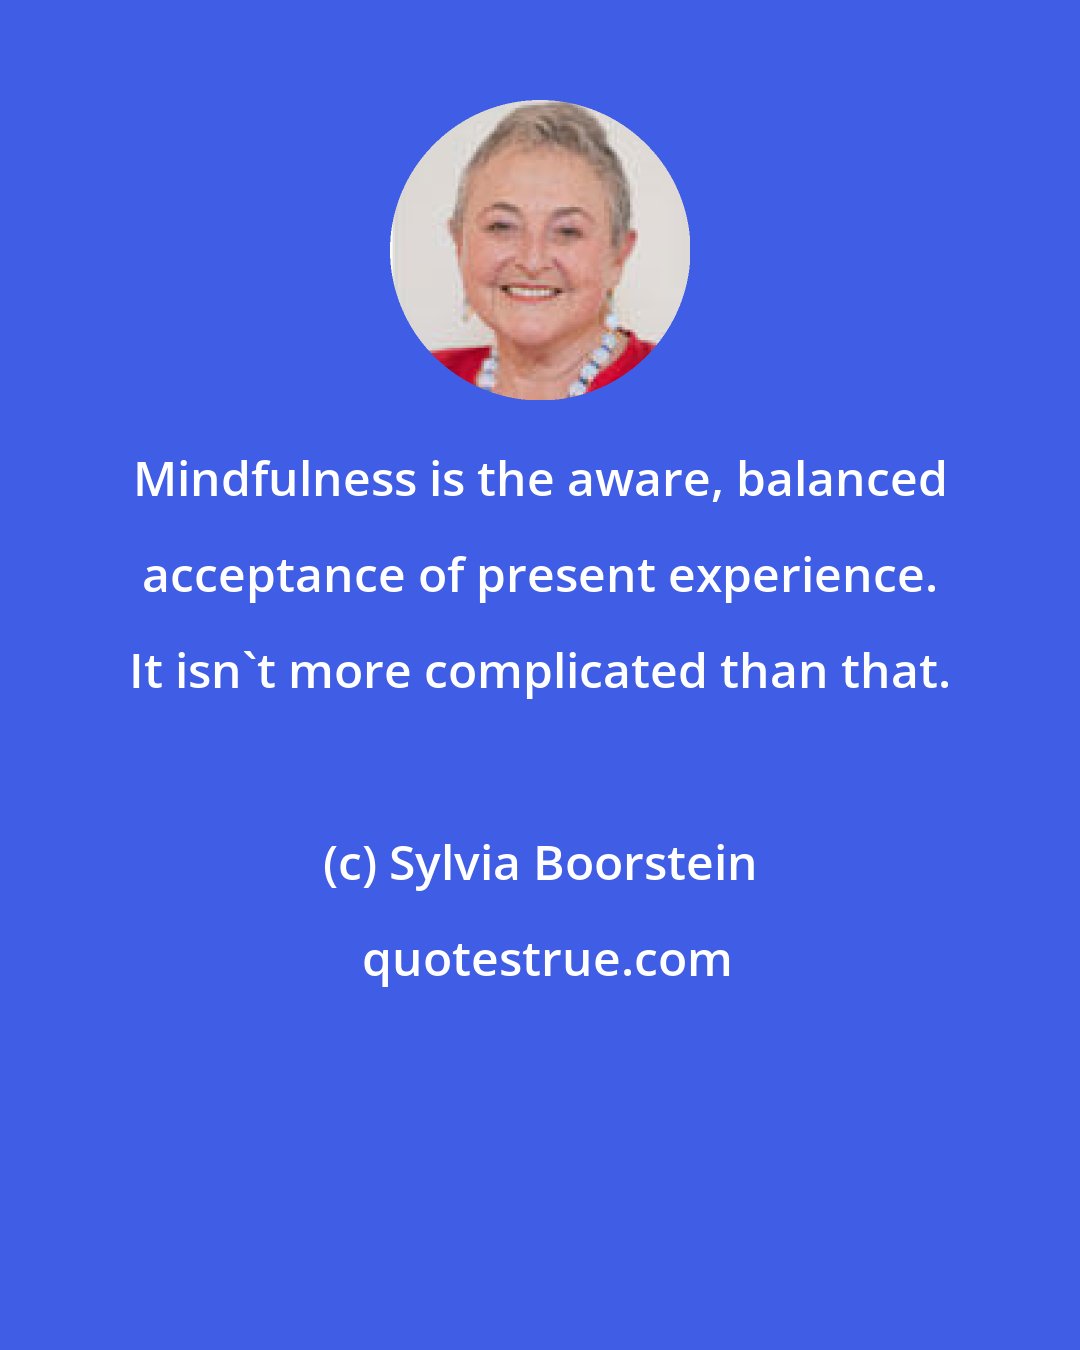 Sylvia Boorstein: Mindfulness is the aware, balanced acceptance of present experience. It isn't more complicated than that.